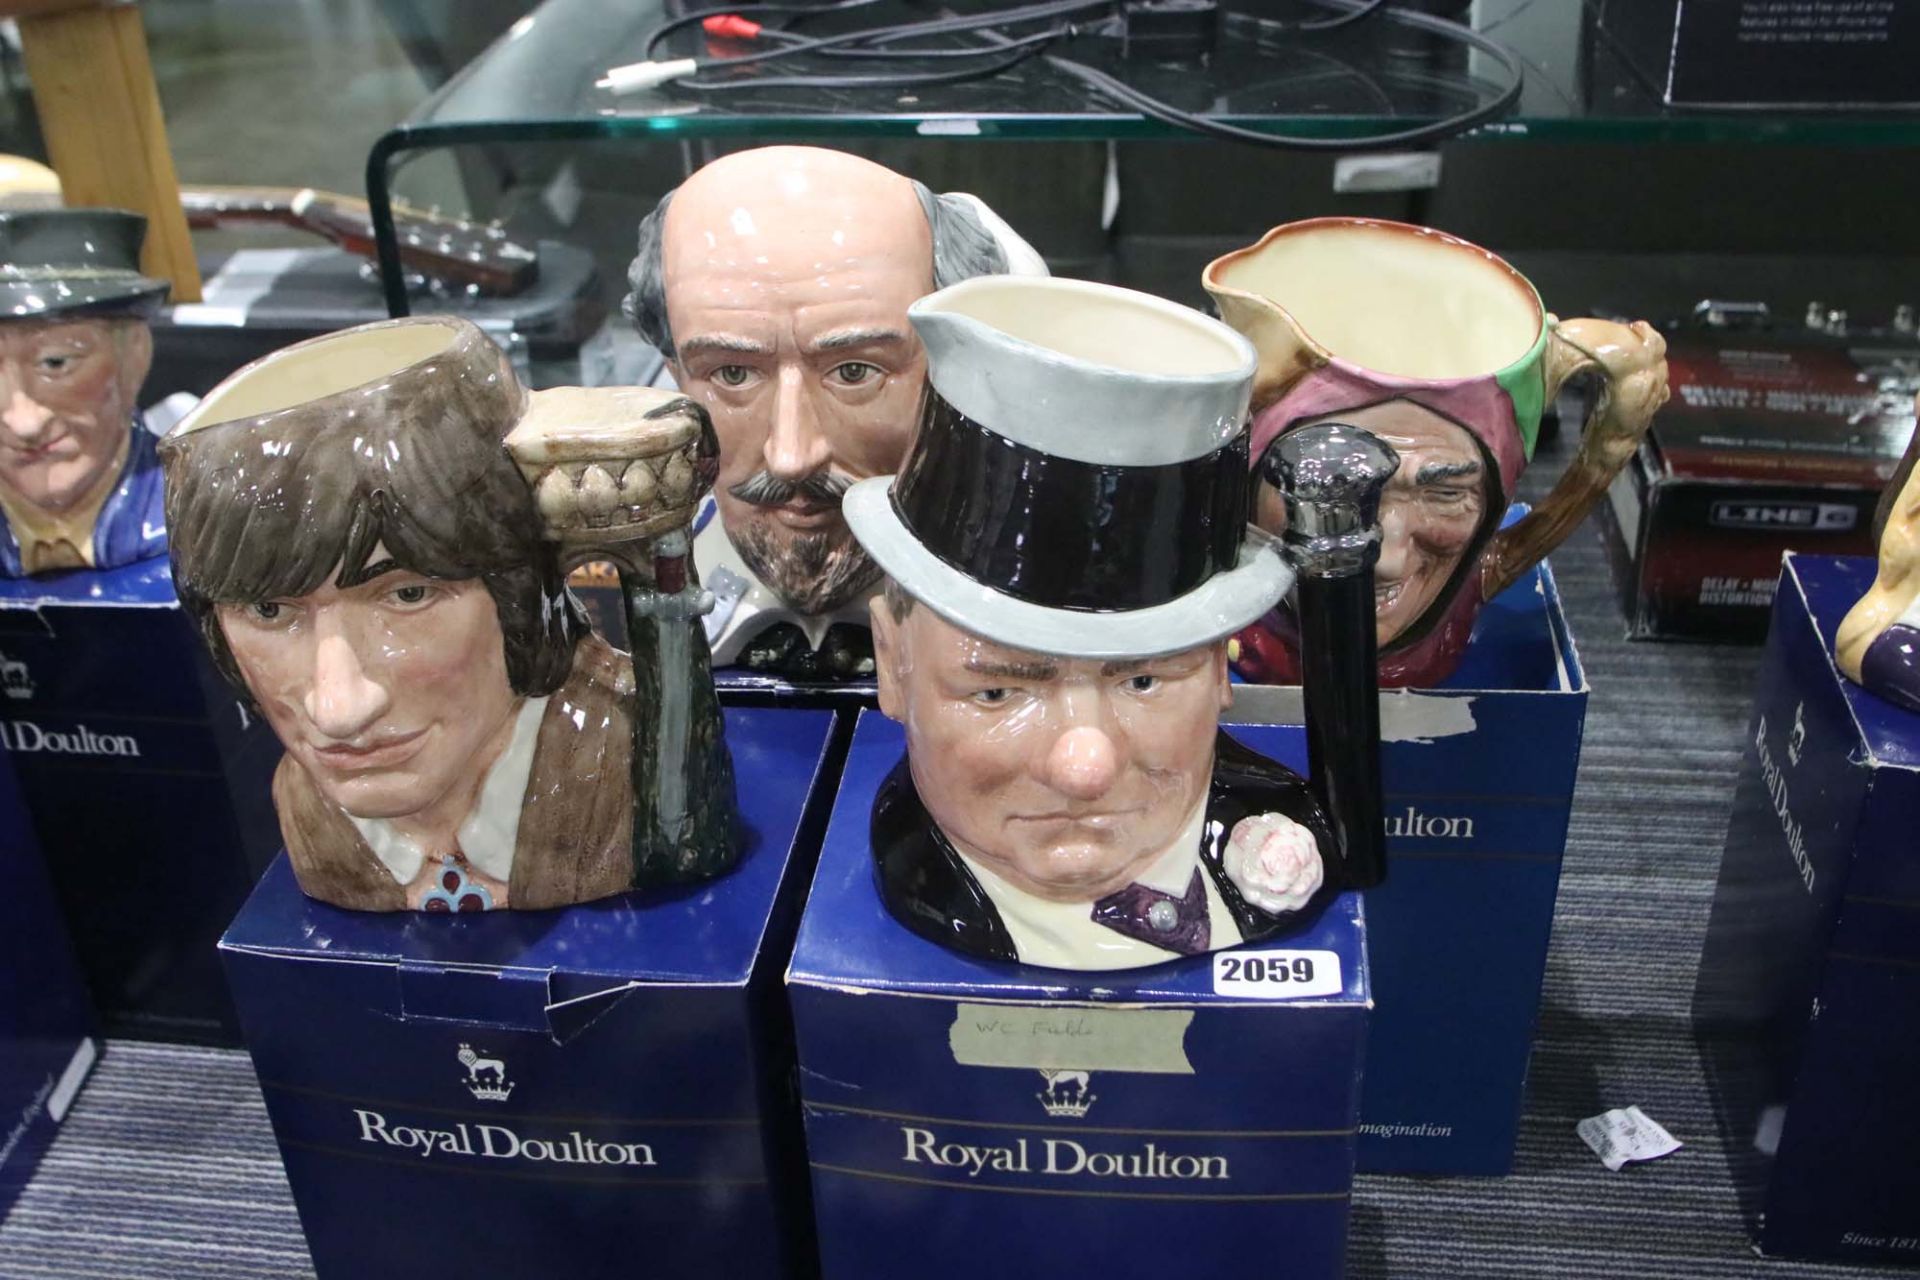 4 various Royal Doulton character jugs to include The Celebrity Collection version of W.C.Fields and